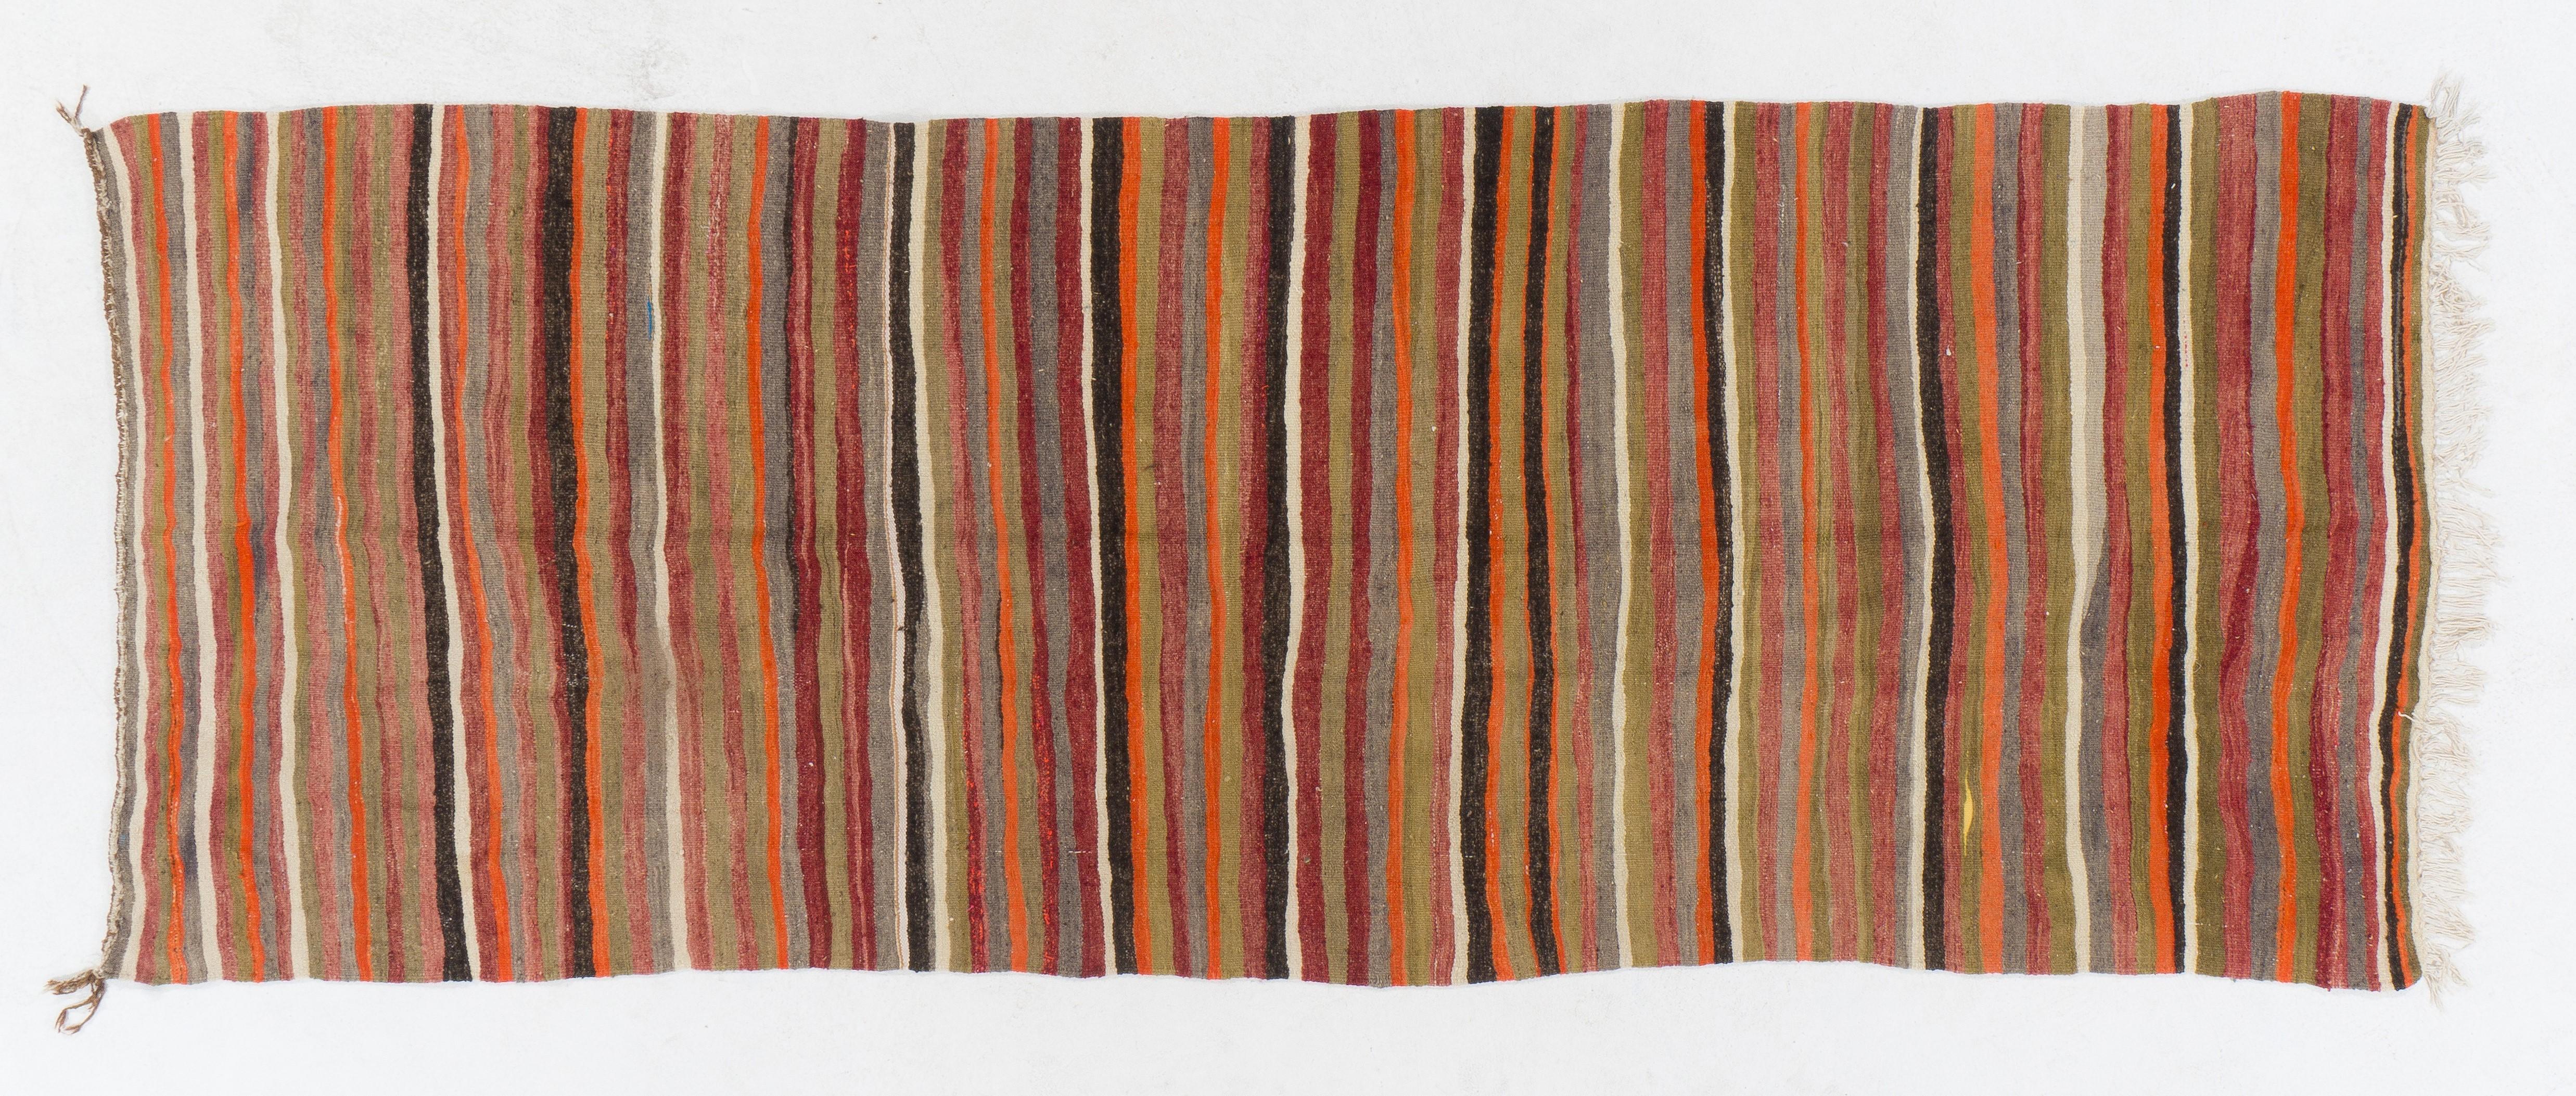 4.5x11.3 Ft Nomadic Kilim Runner, 100% Handspun Wool, Multicolored Banded Rug In Good Condition For Sale In Philadelphia, PA